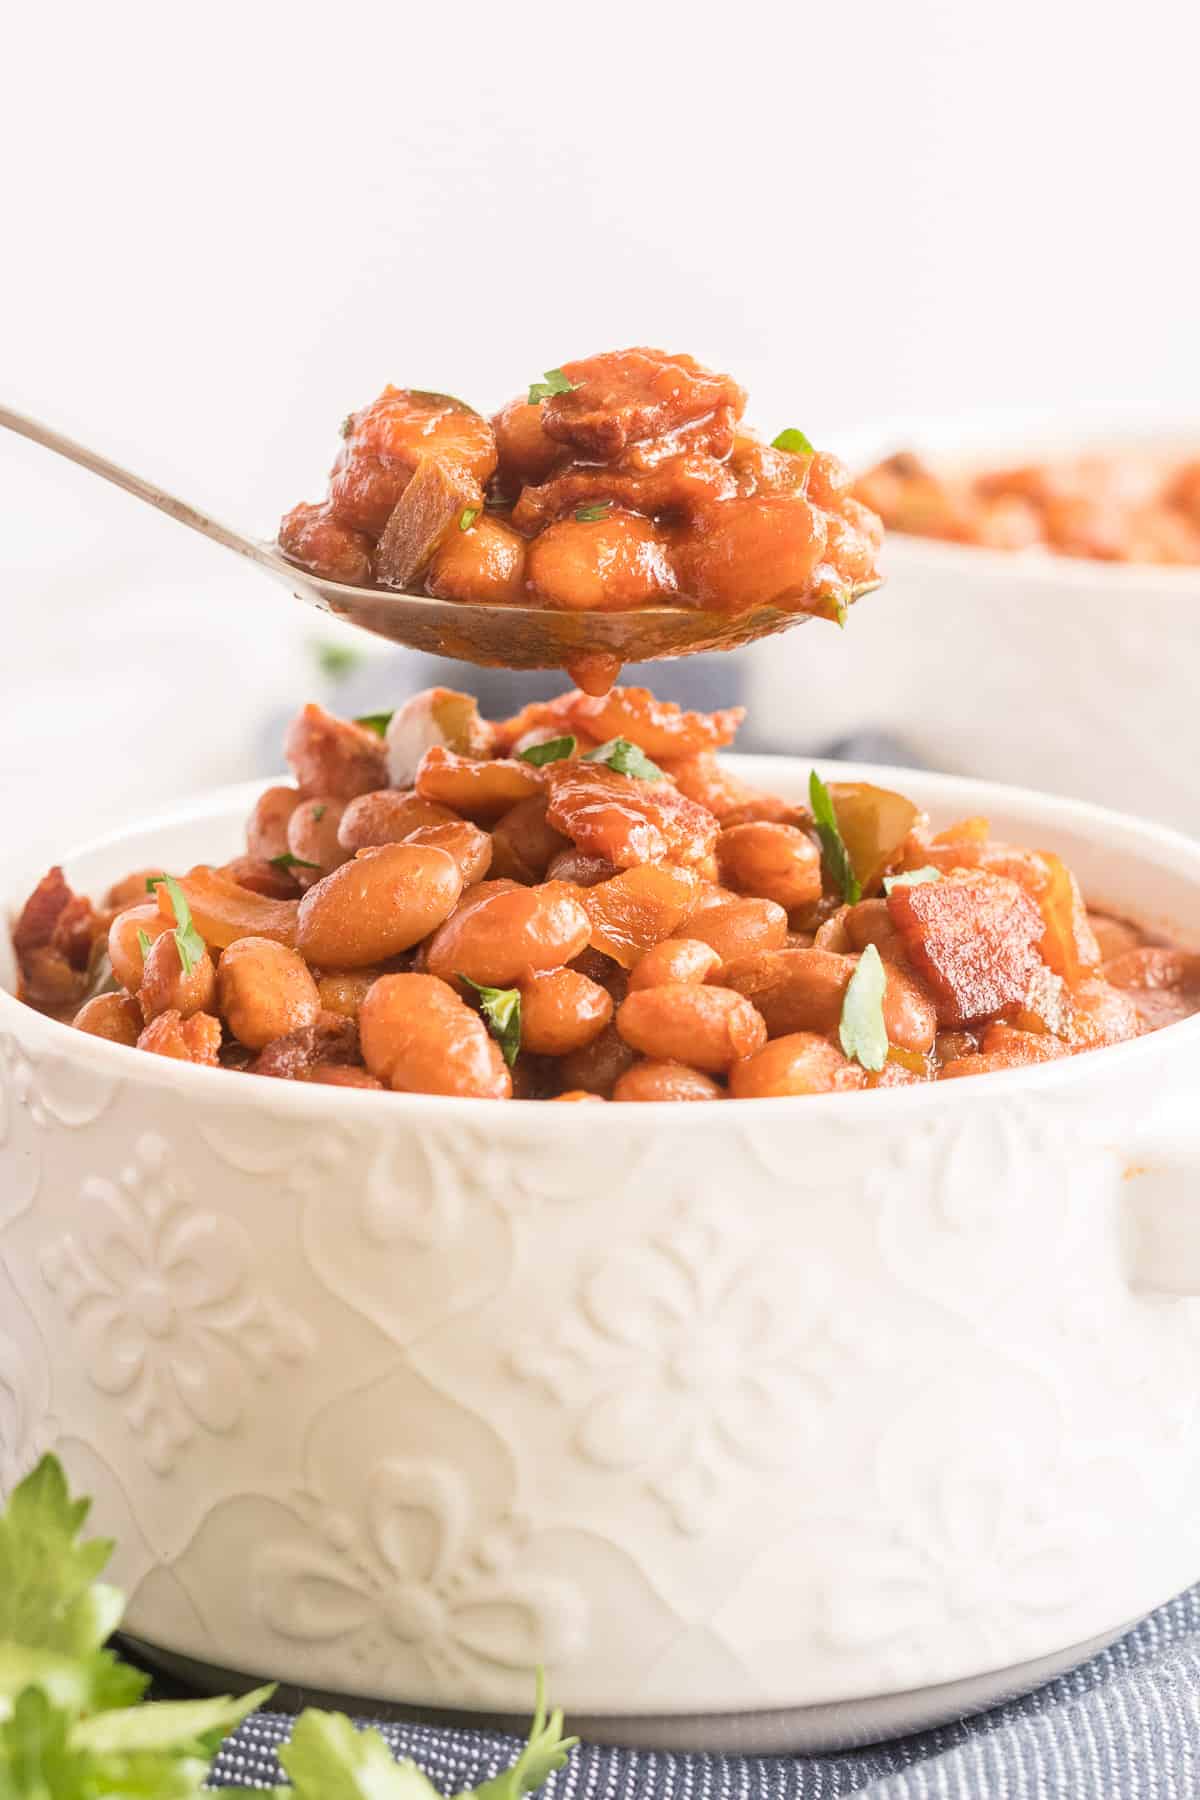 A spoon lifts some baked beans from a white serving dish.